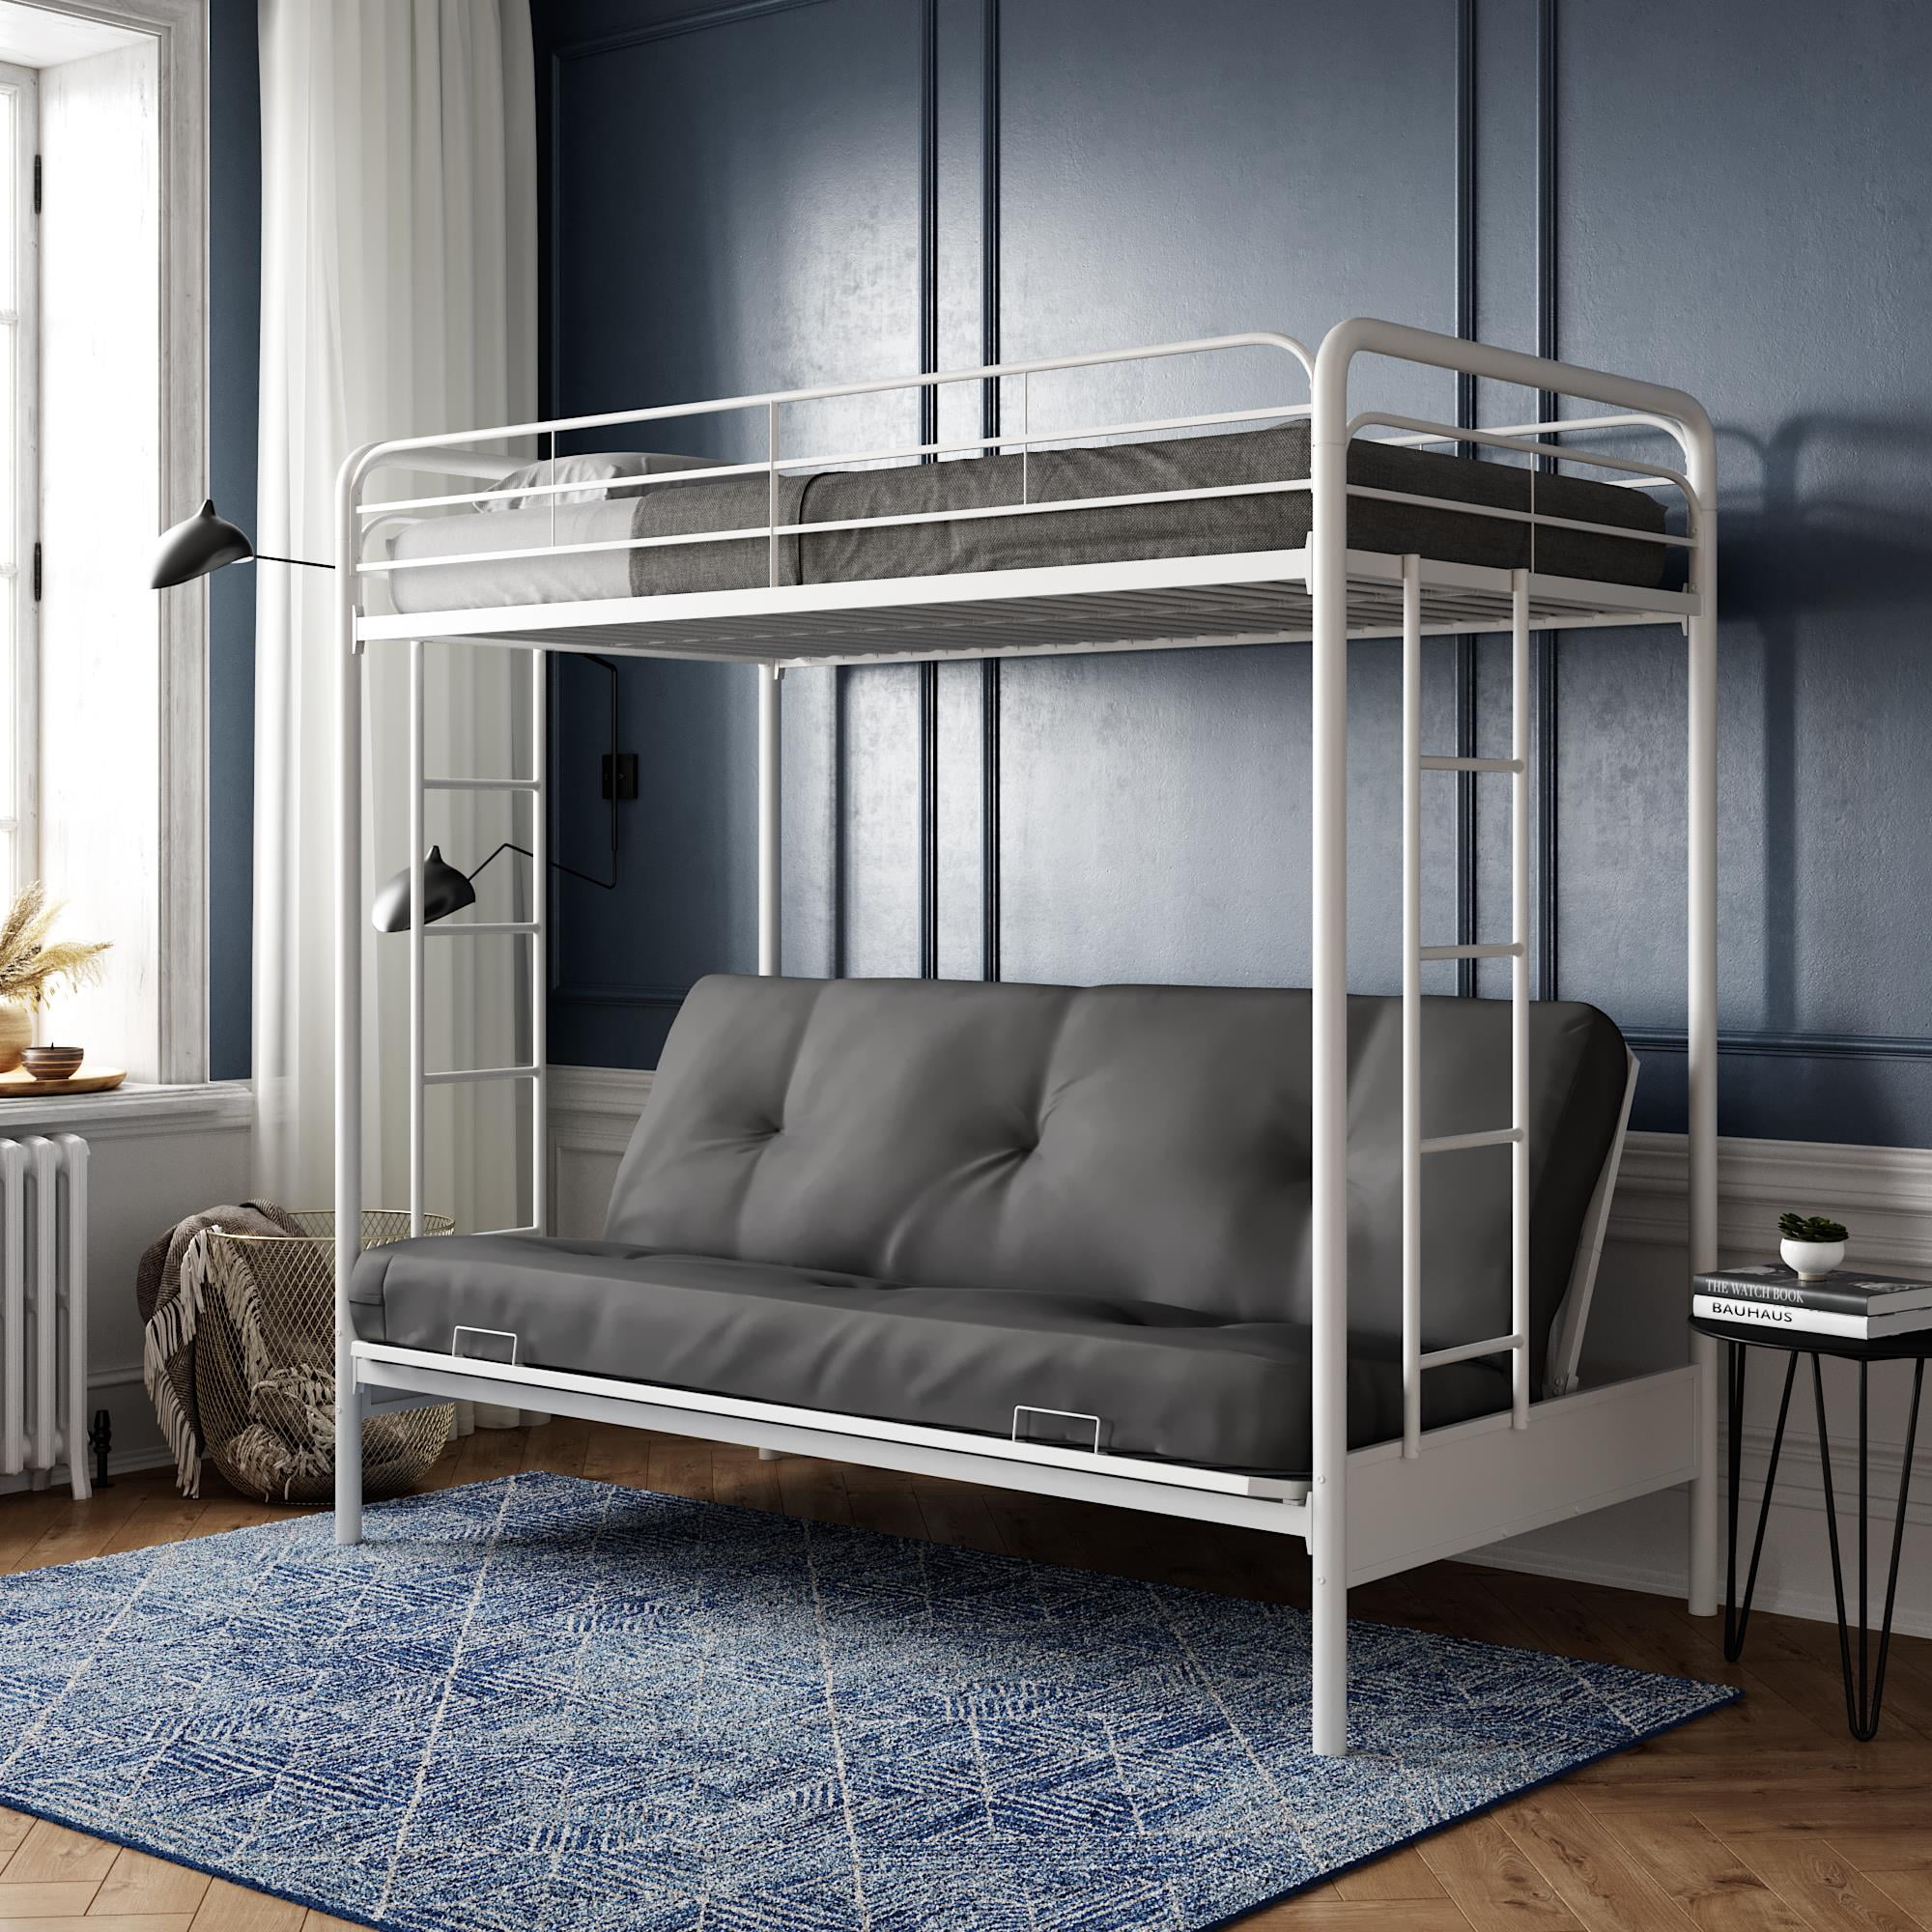 Dhp Twin Over Futon Metal Bunk Bed, Bunk Bed With Futon And Mattress